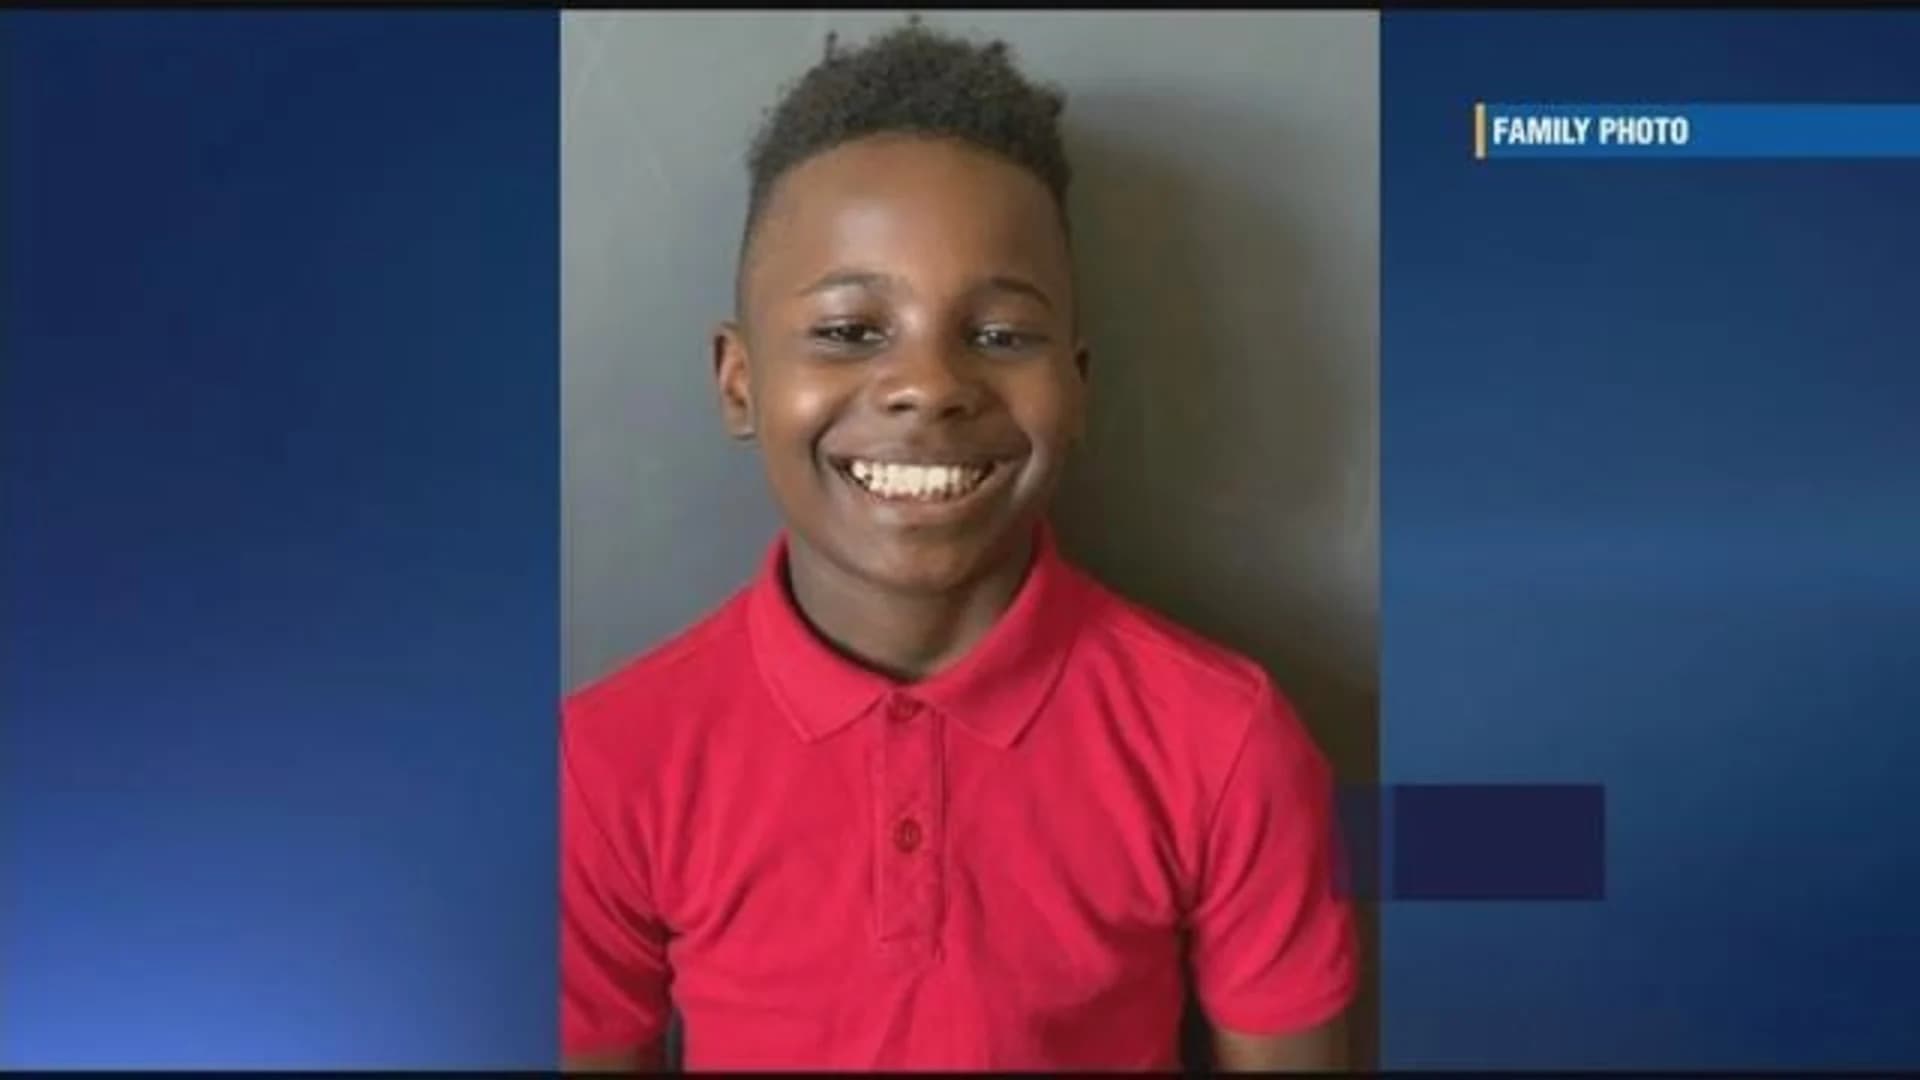 Family: Boy struck by stray bullet faces long road to recovery